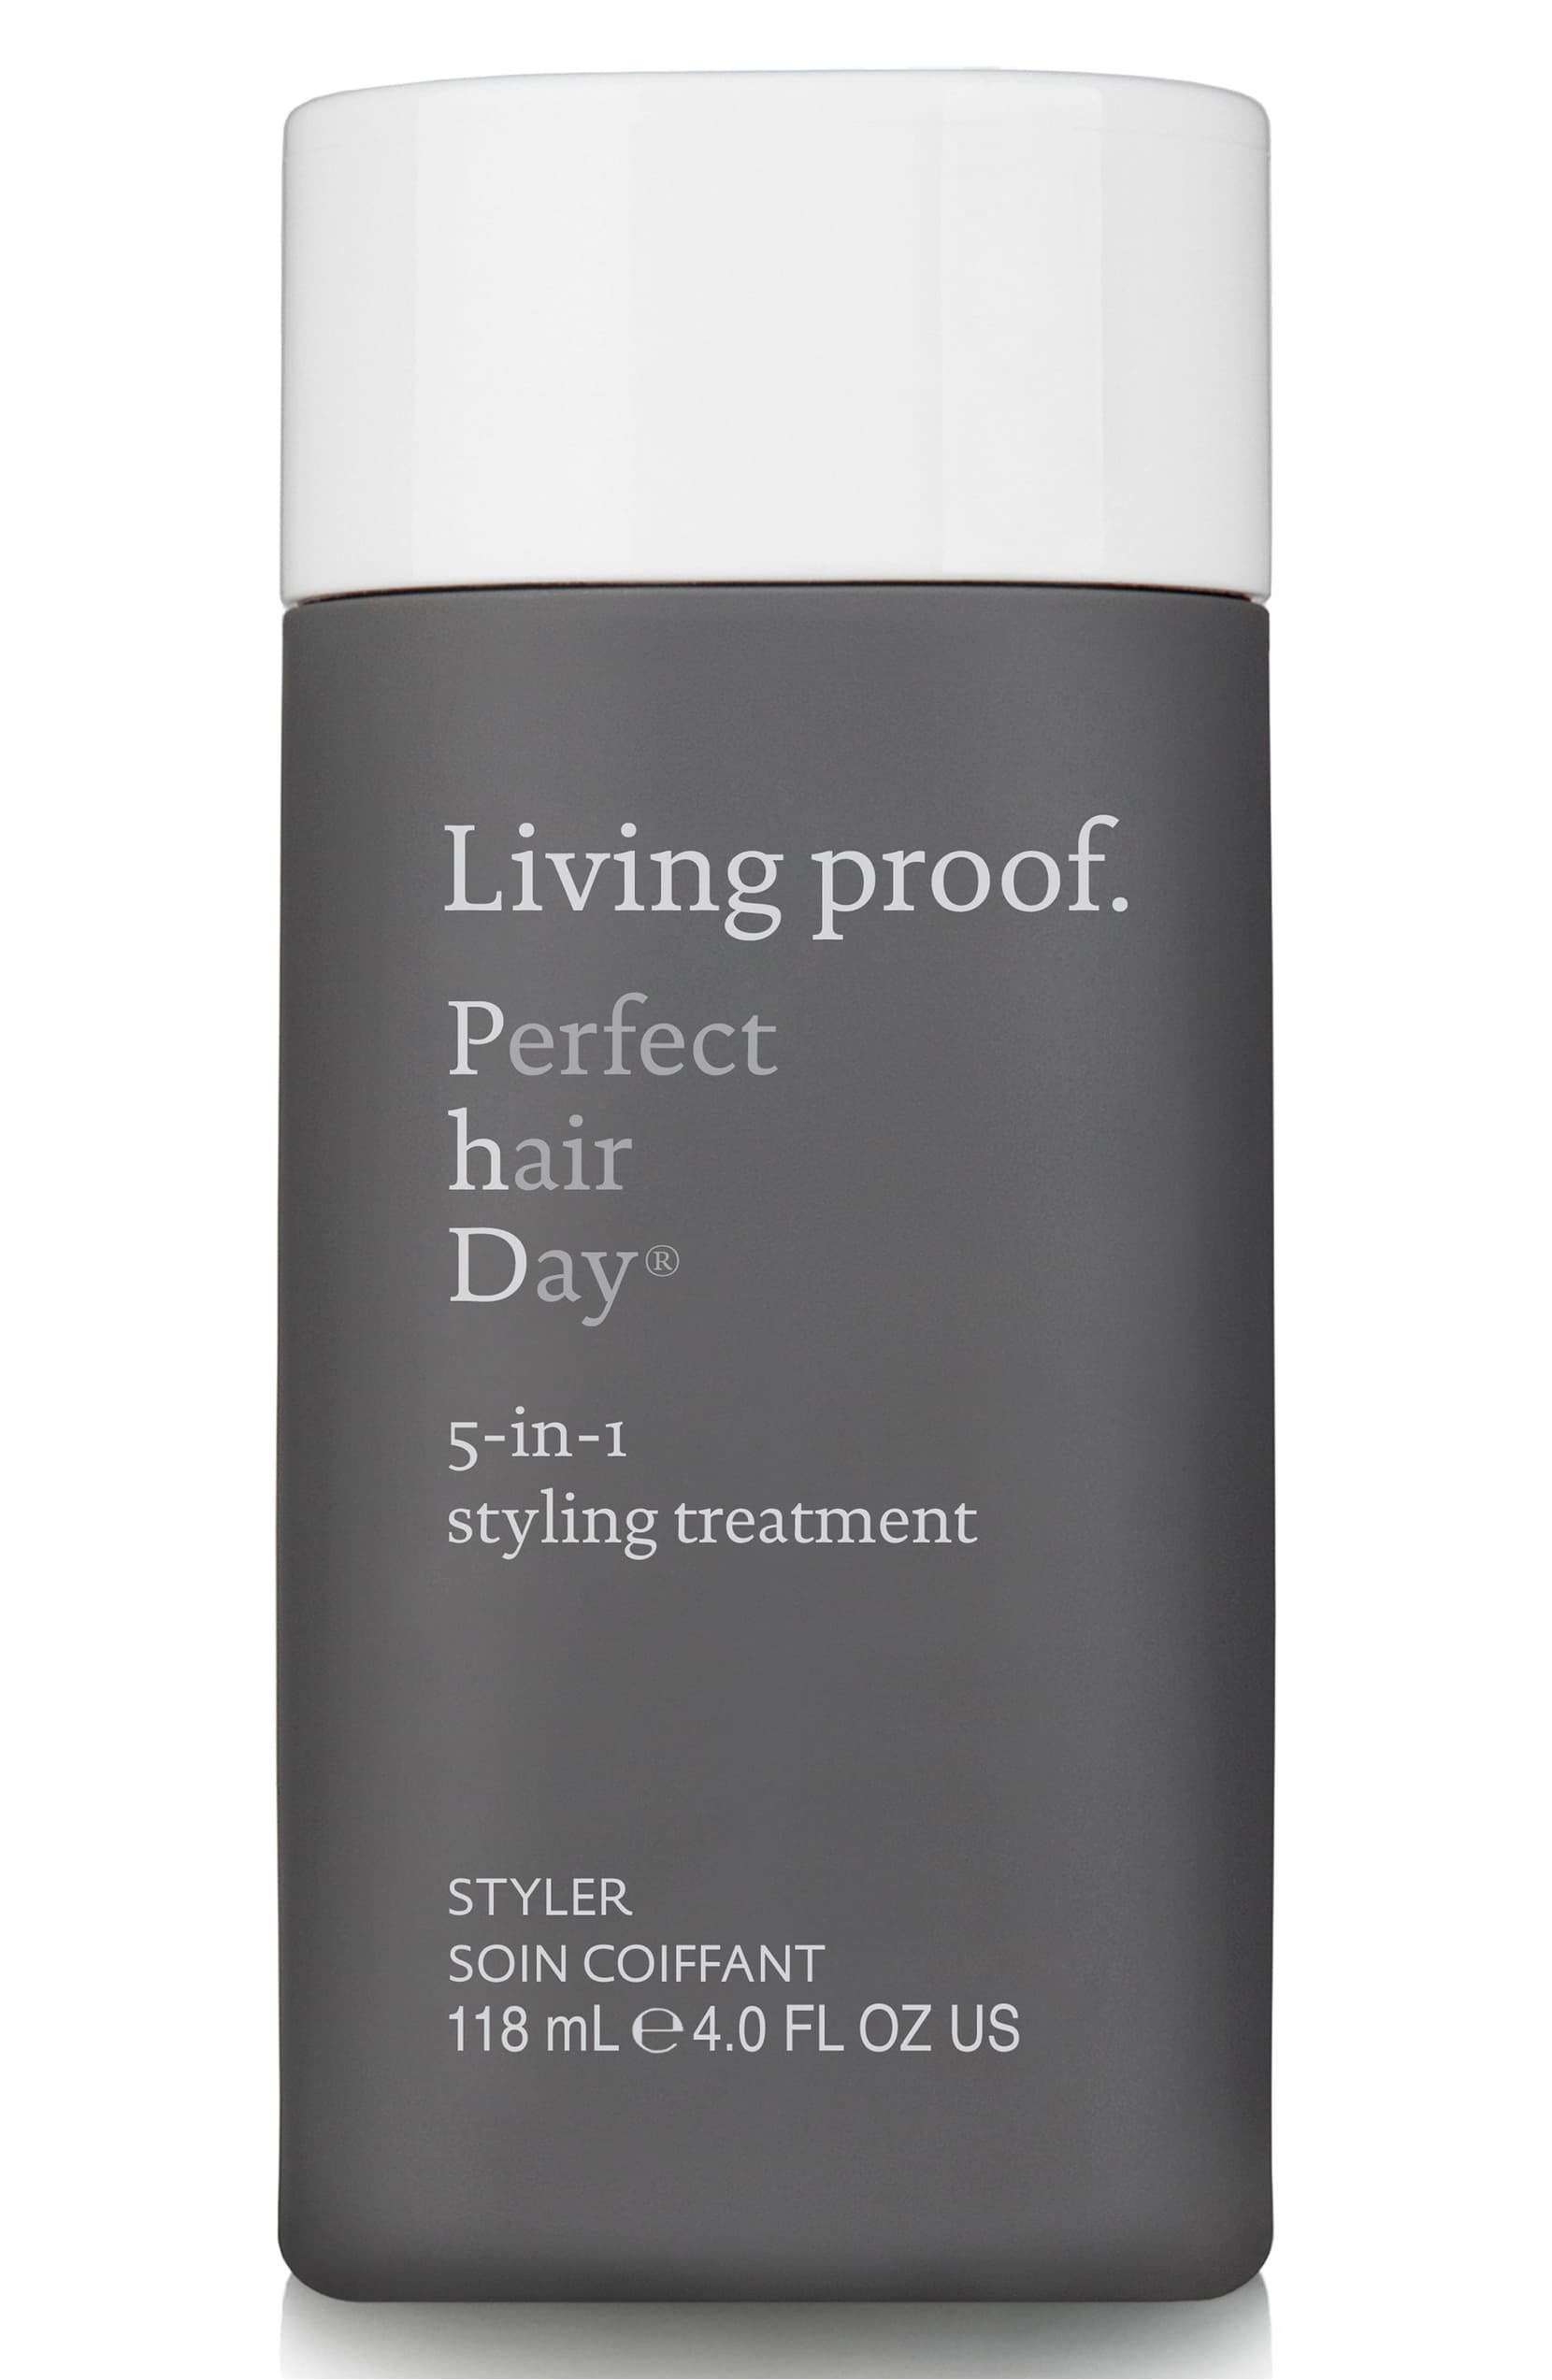 Living Proof's Perfect Hair Day 5-in-1 Simplifies Your Routine